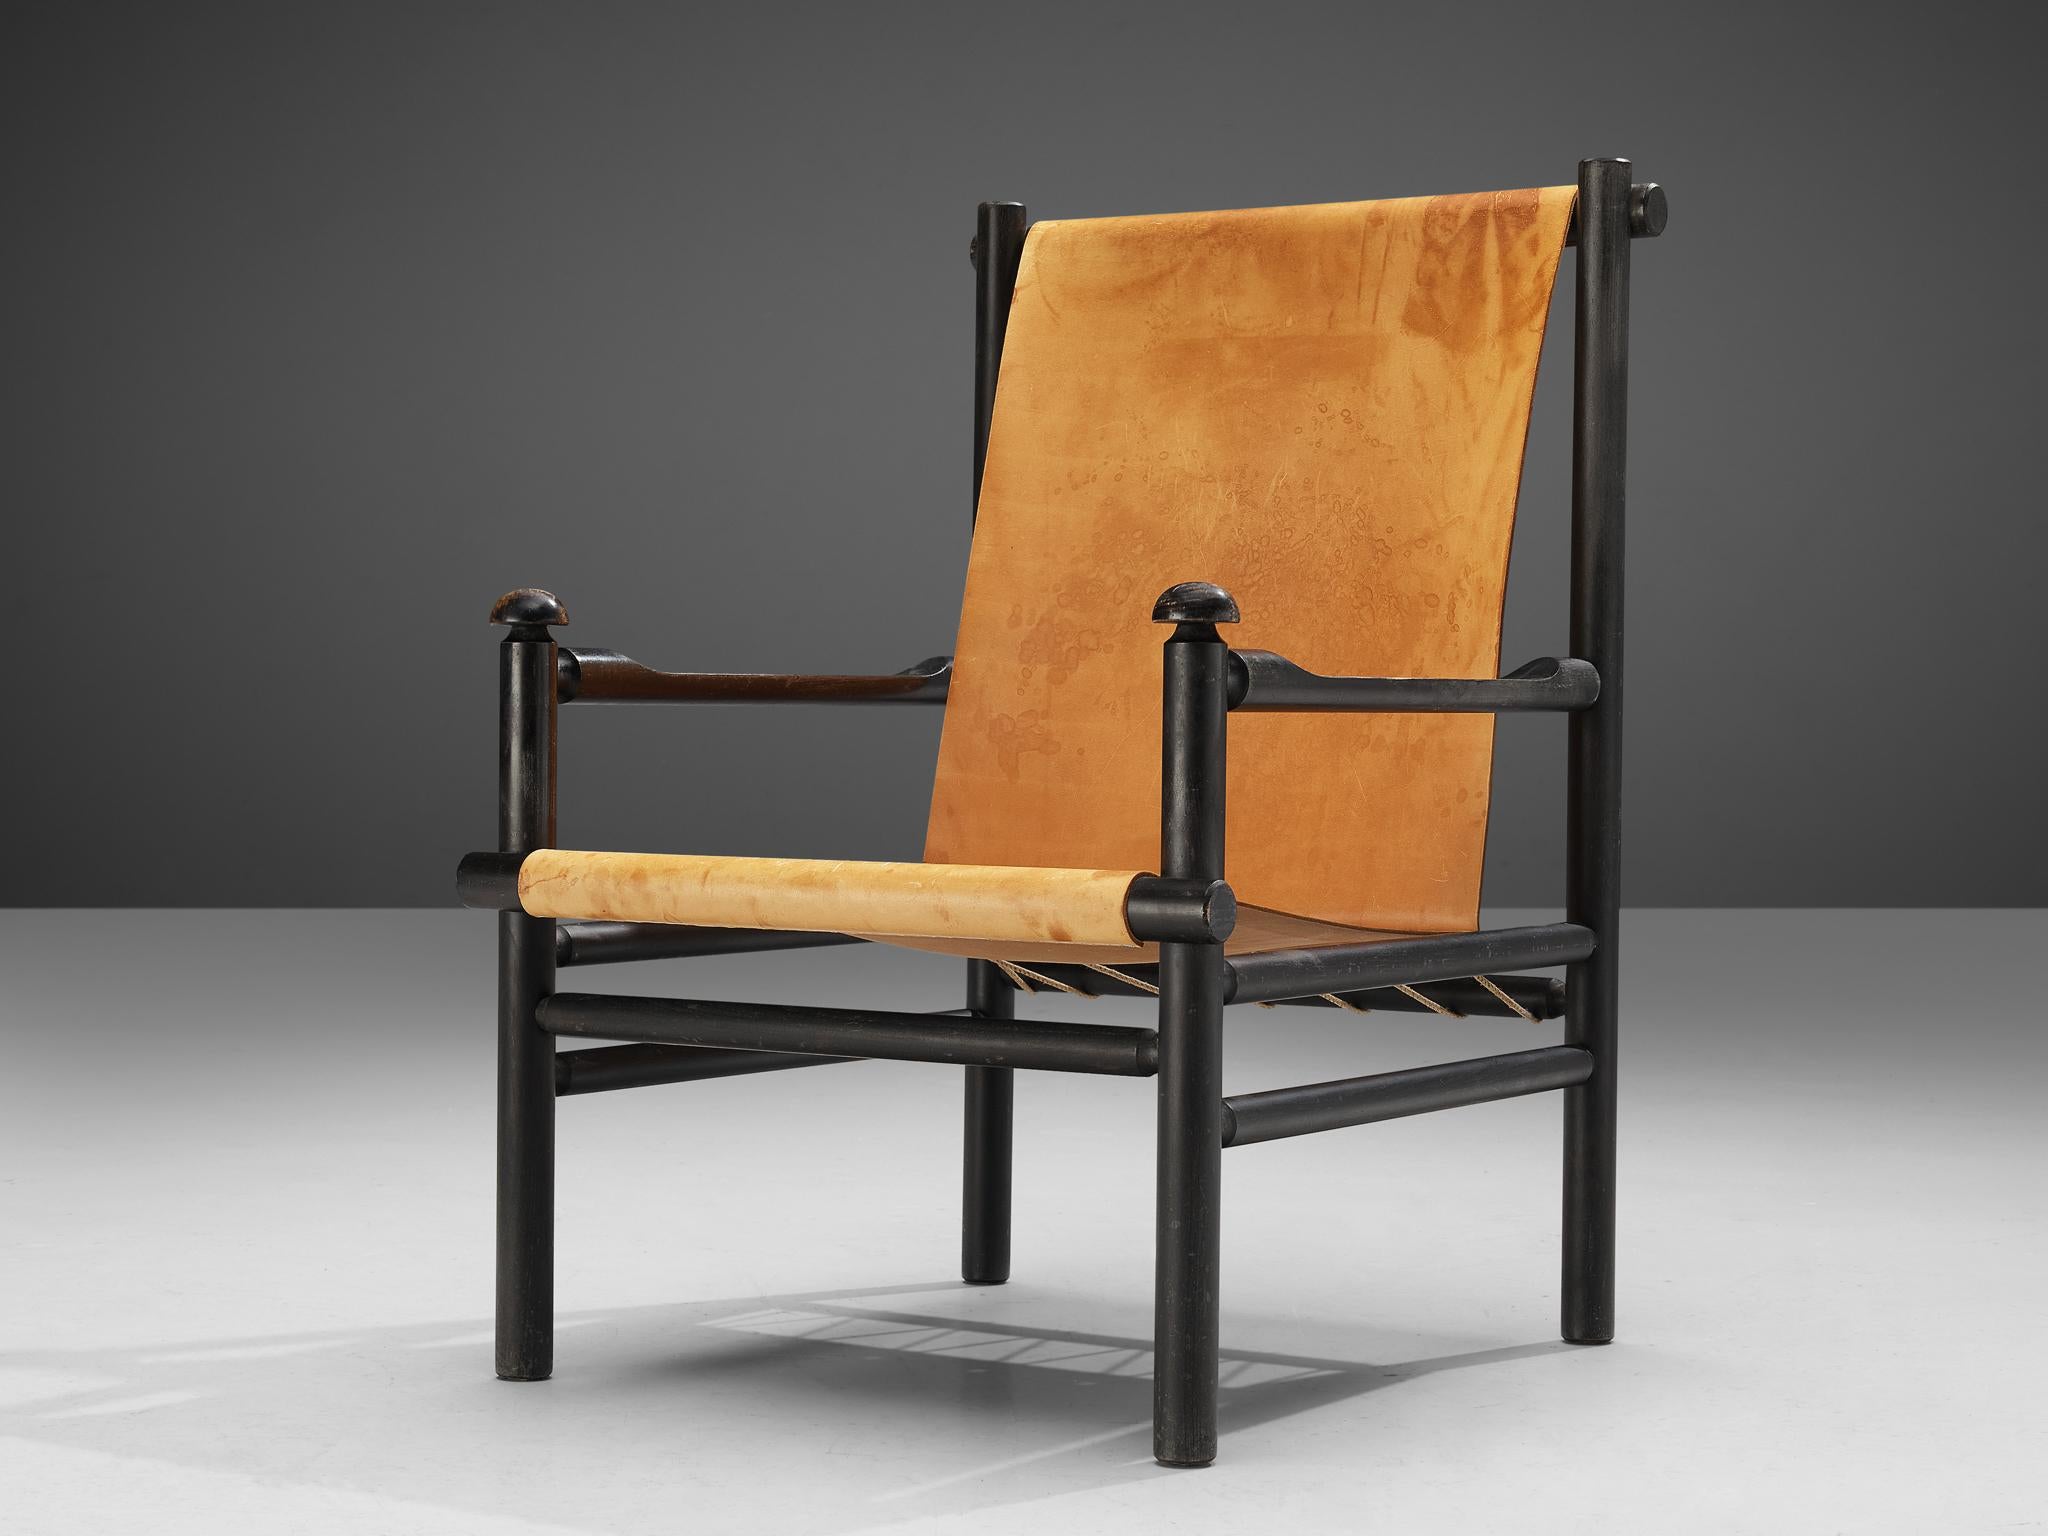 Armchair, leather, lacquered wood, rope, Italy, 1950s

This Italian chair embodies a strong and angular frame, while also offering a spacious feel due to the open design and warm color leather seating. The visible joints are a design highlight and